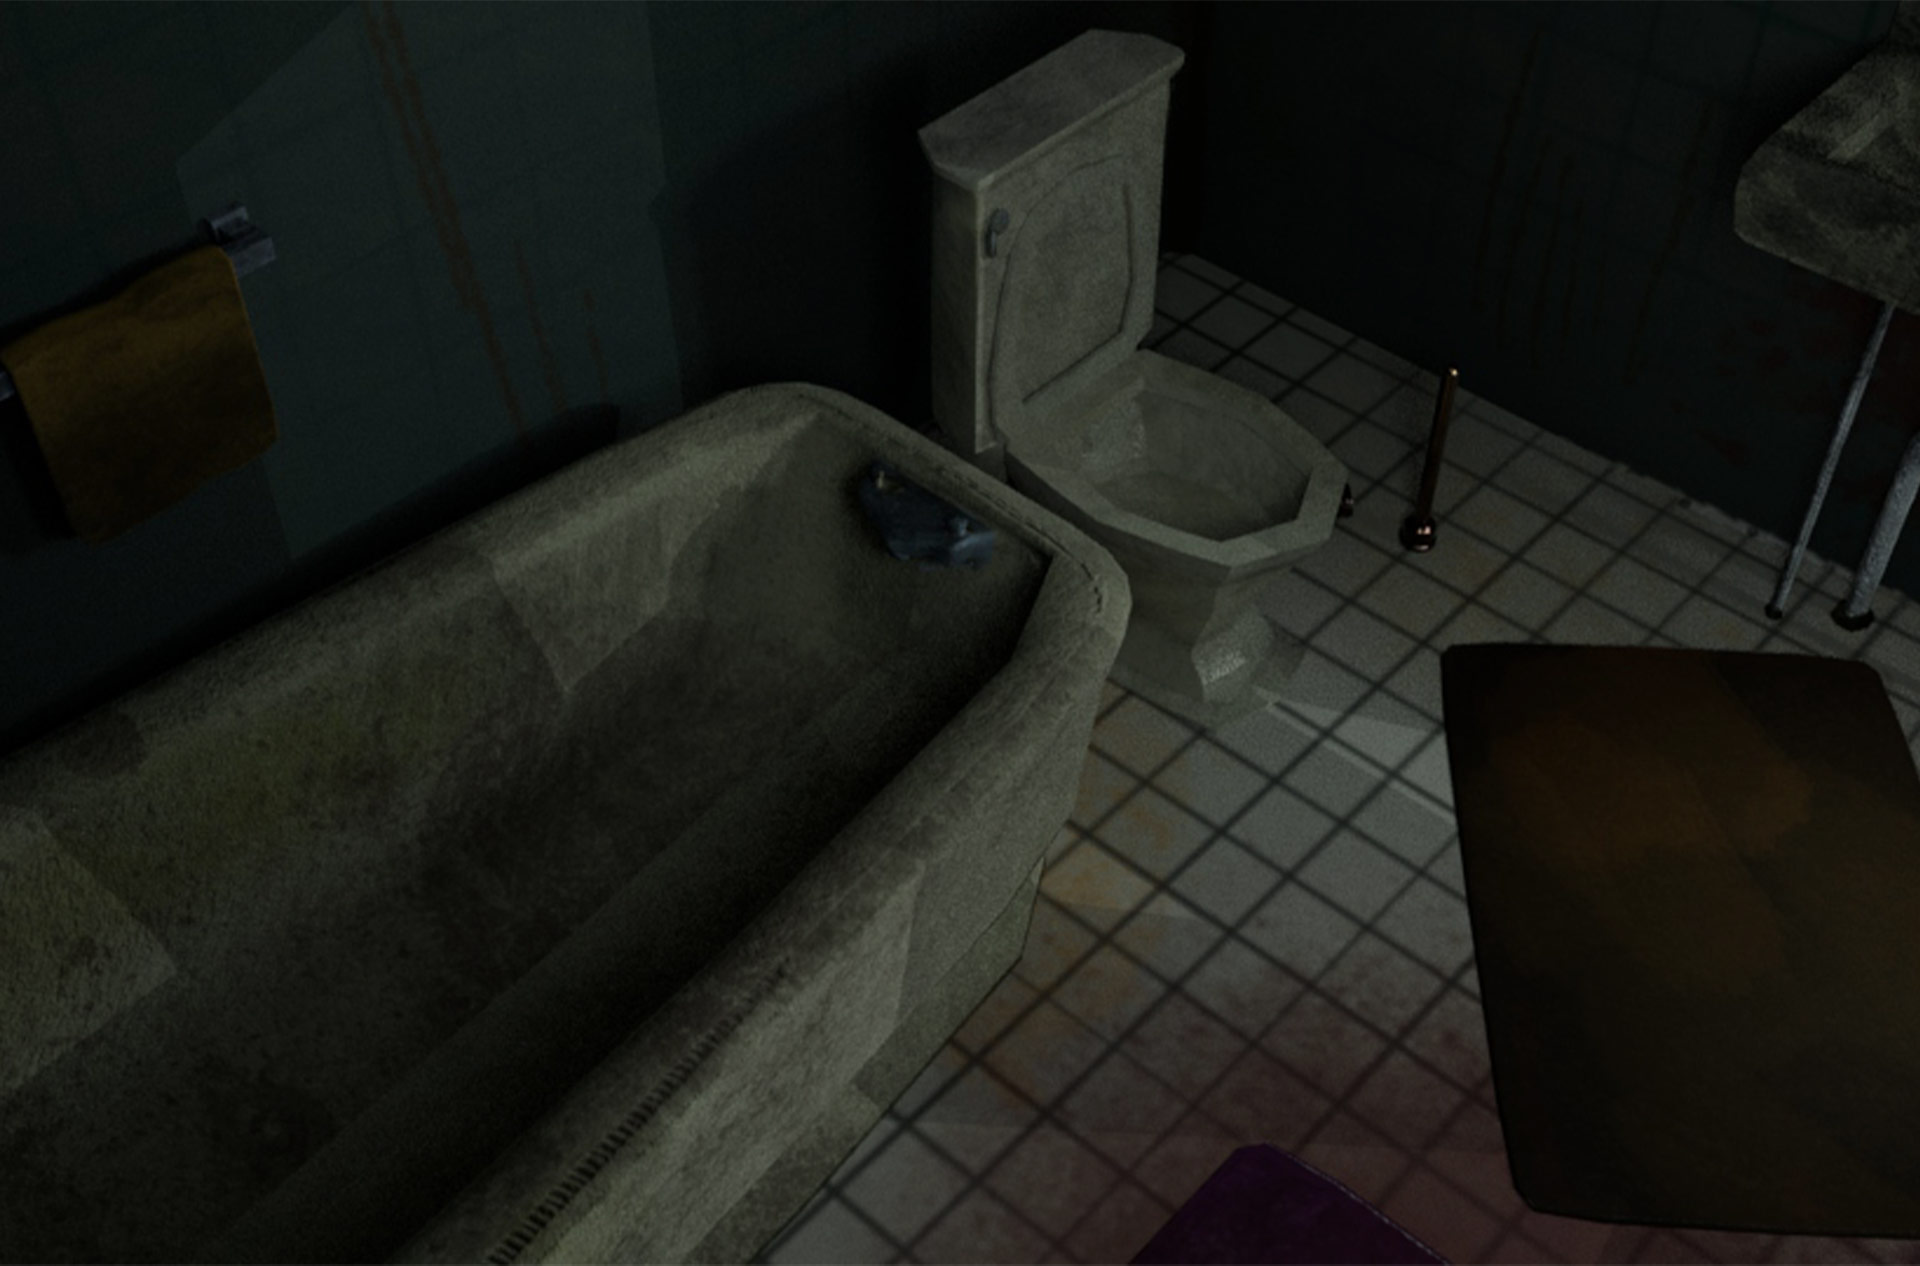 An image of another angle of the bathroom. Here, the bathtub and toilet are more clearly visible. Both are incredibly dirty.